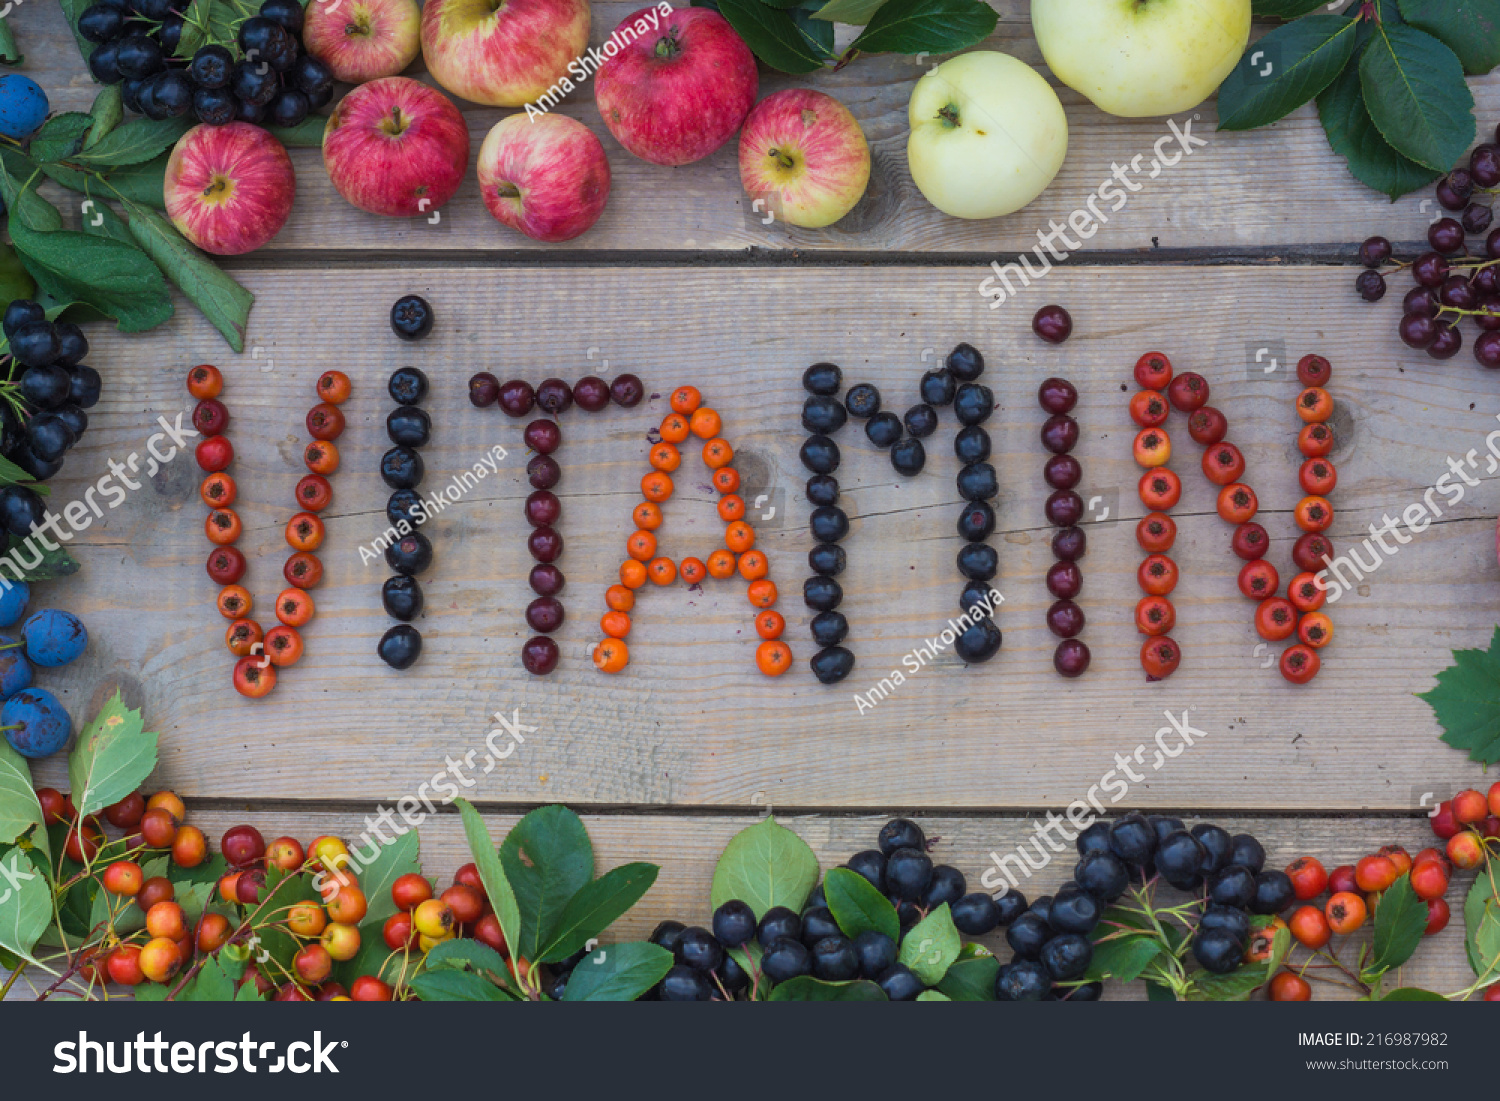 "Vitamin" word on a wooden background #216987982